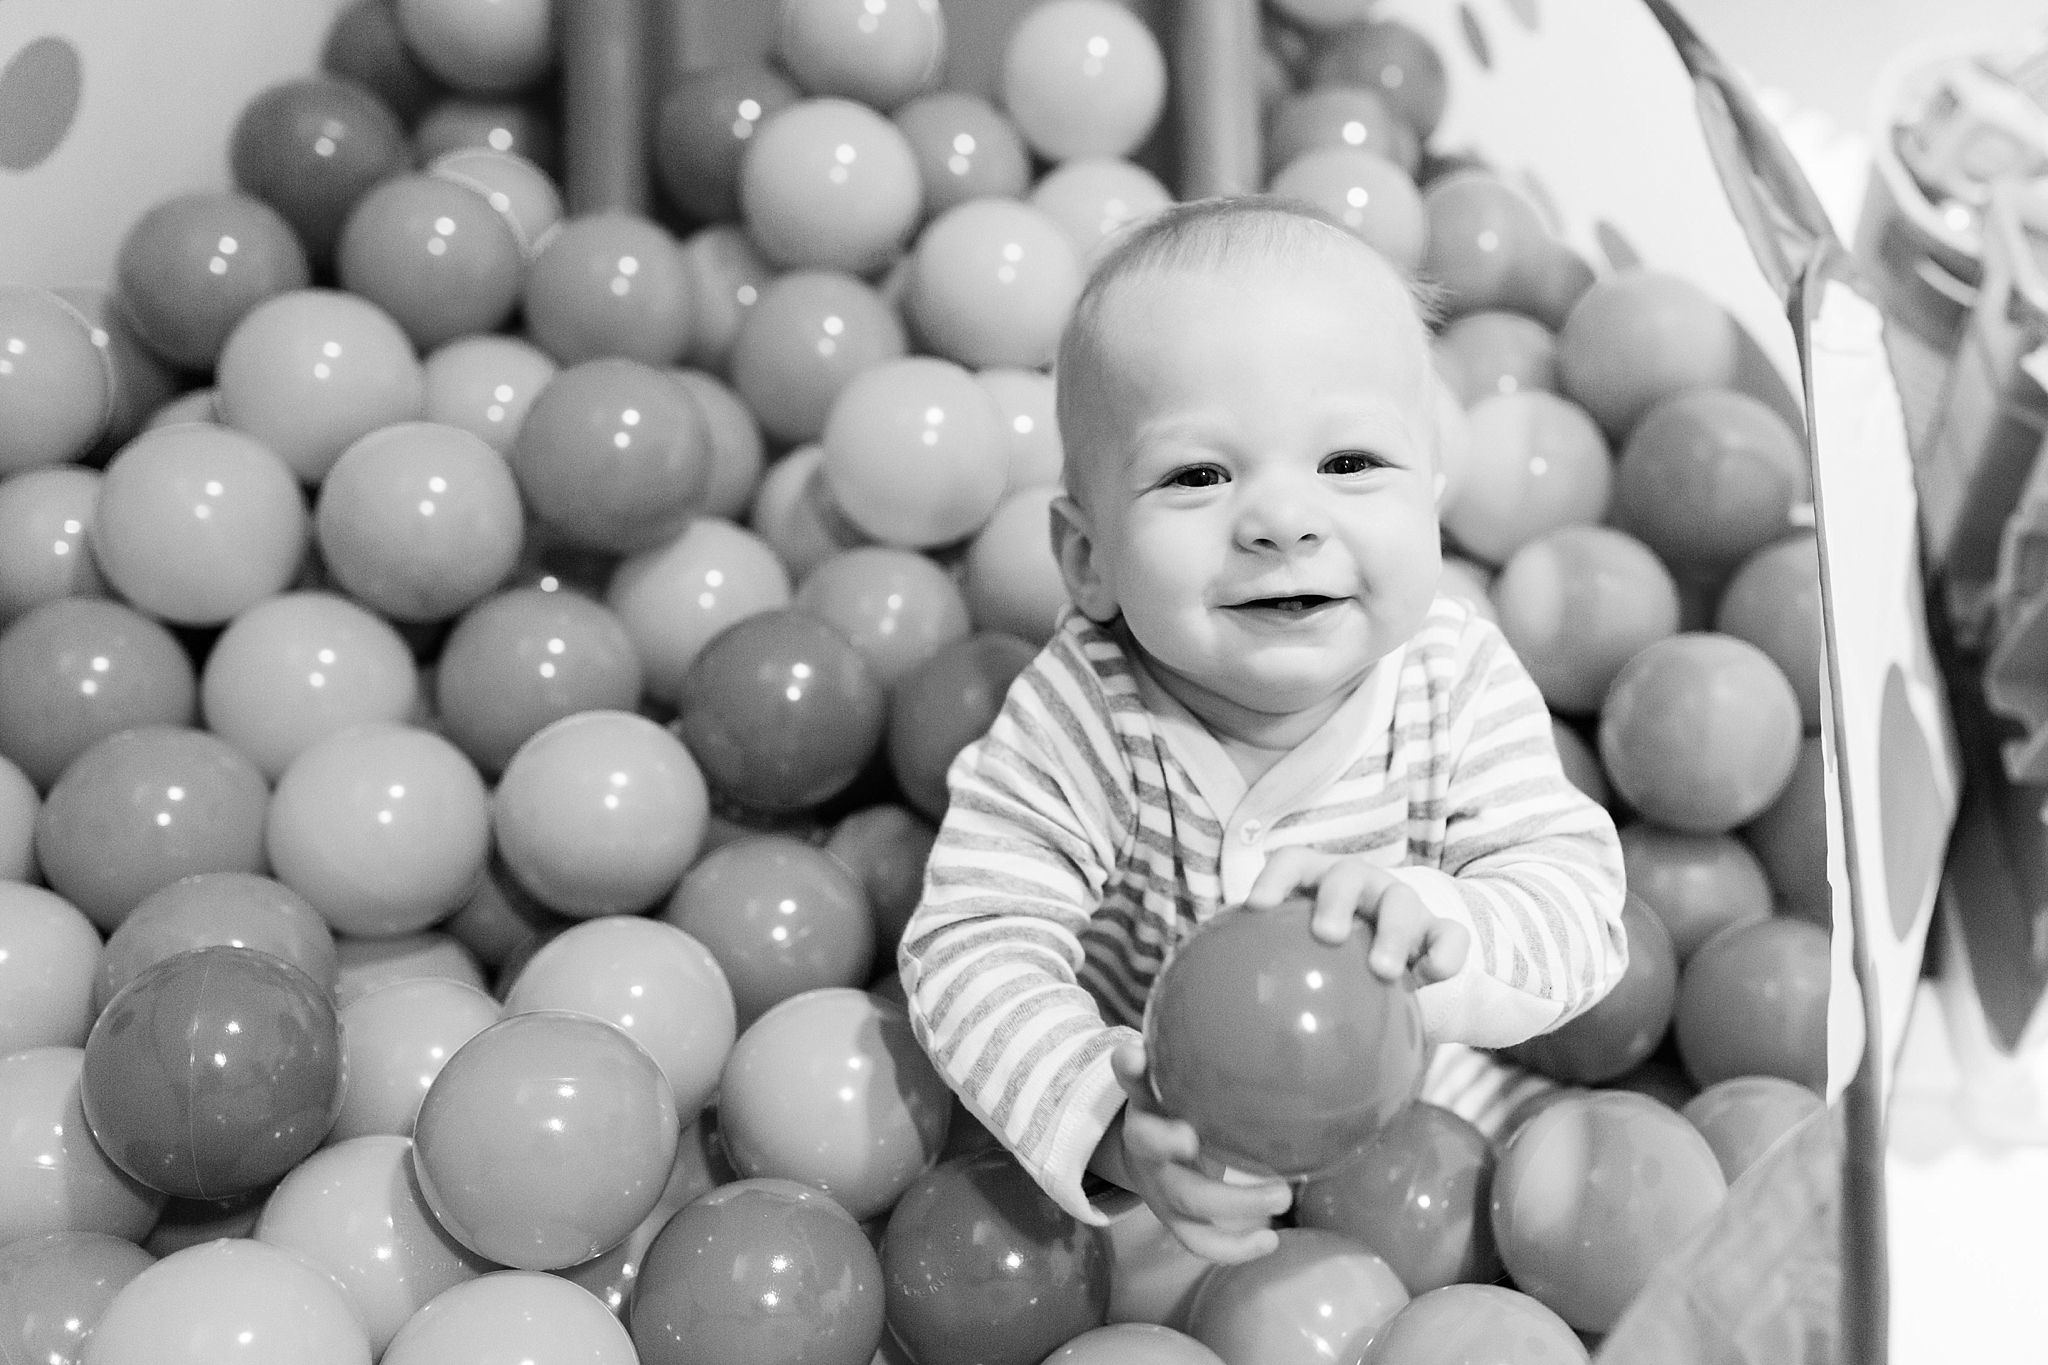 This DC wedding photographer shares personal photos of her new son, Landon James, from months seven through nine of his life.